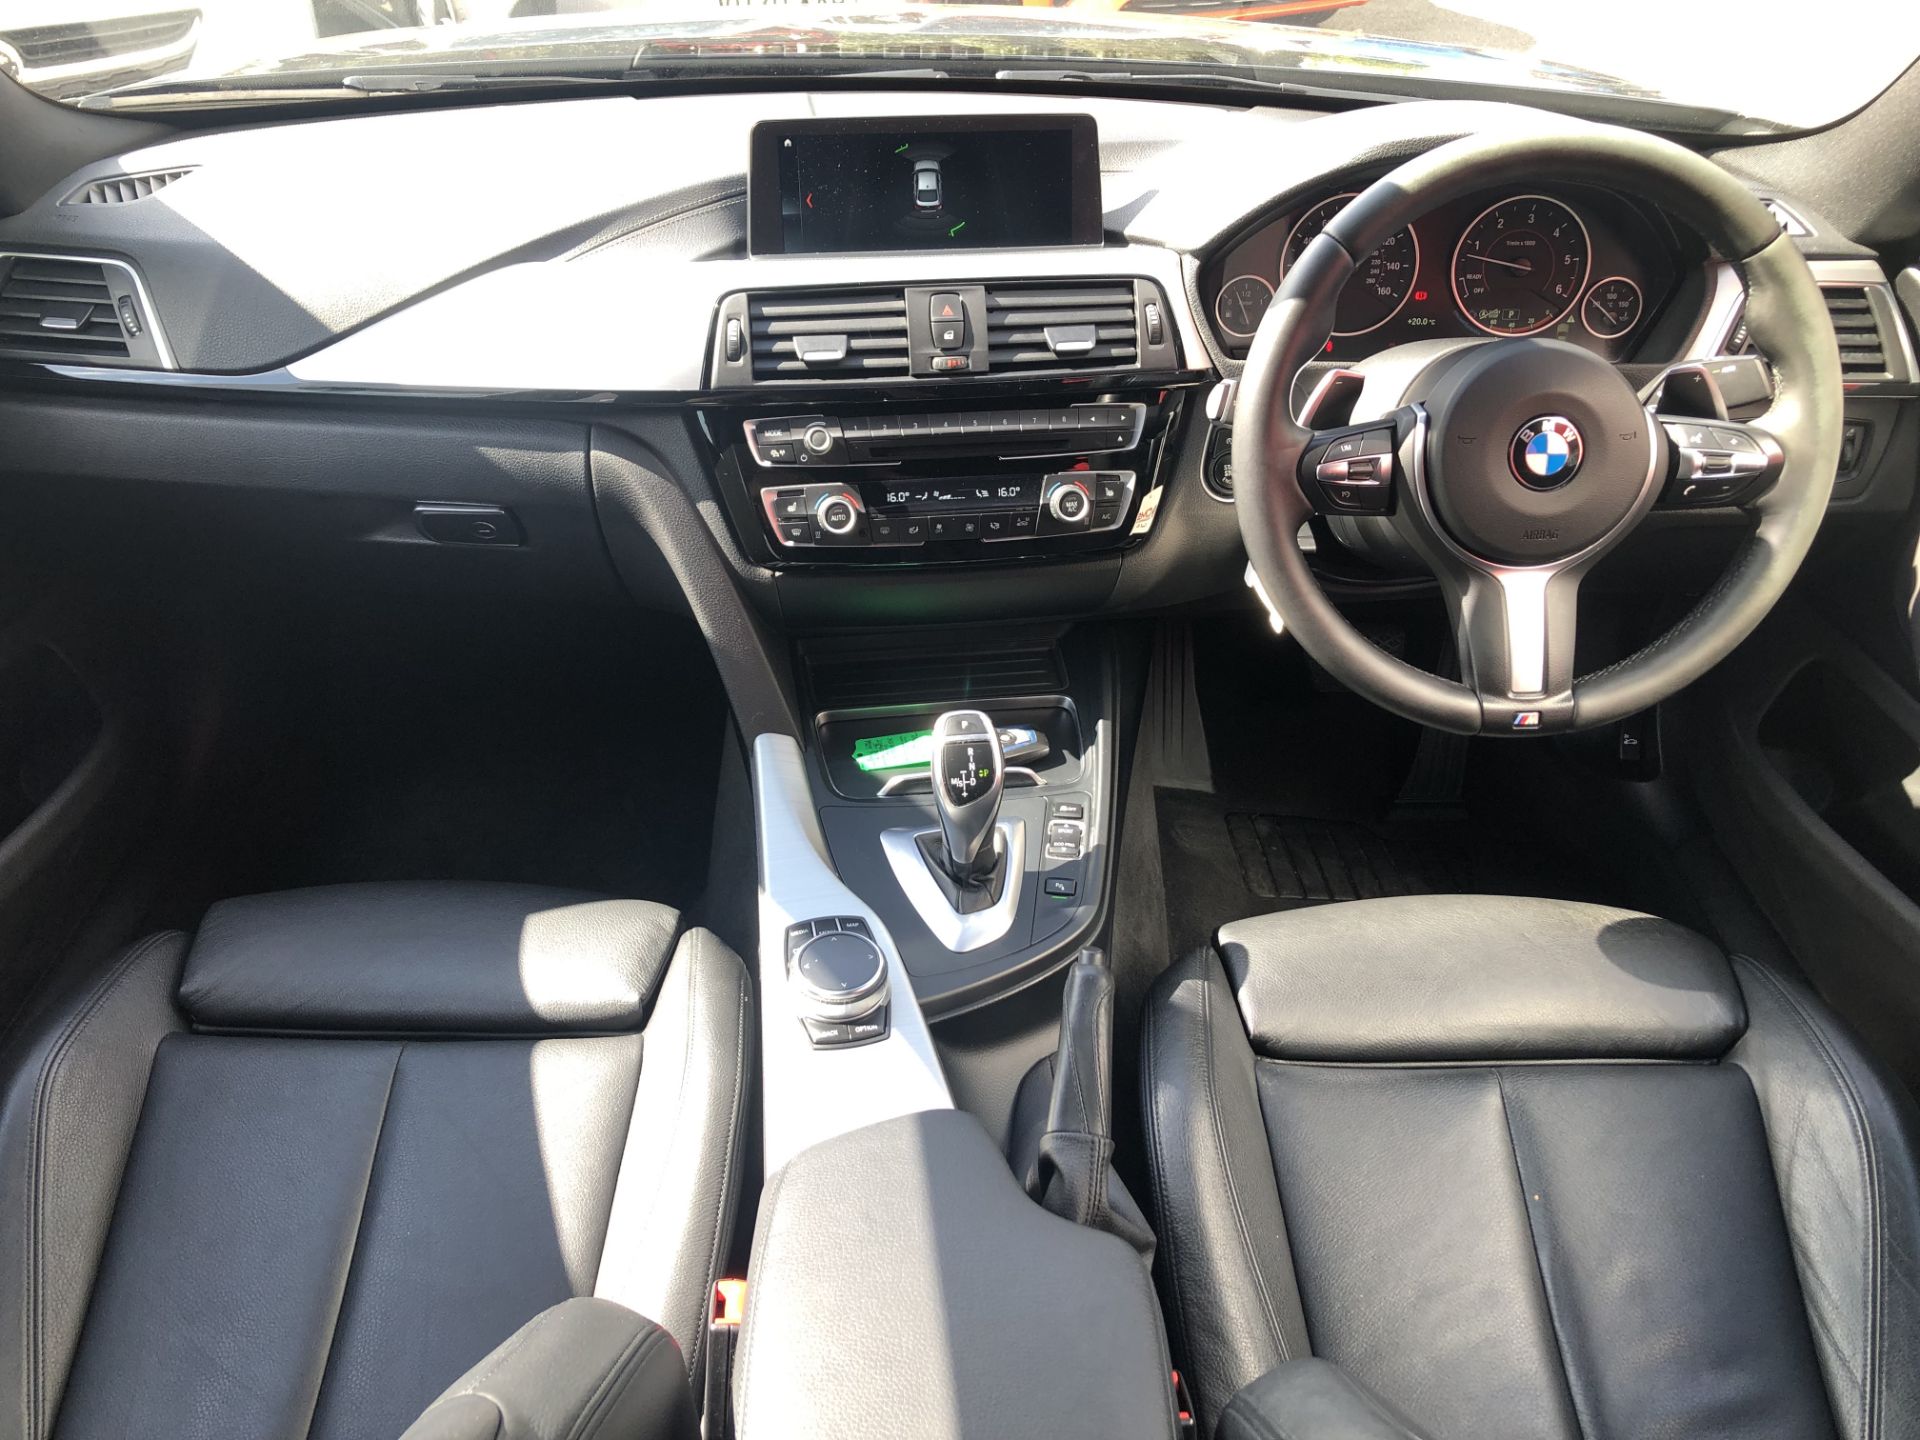 BMW 435d xDrive M Sport 5dr Automatic (Professional Media), Registration: LC67JVL, Date First - Image 6 of 7